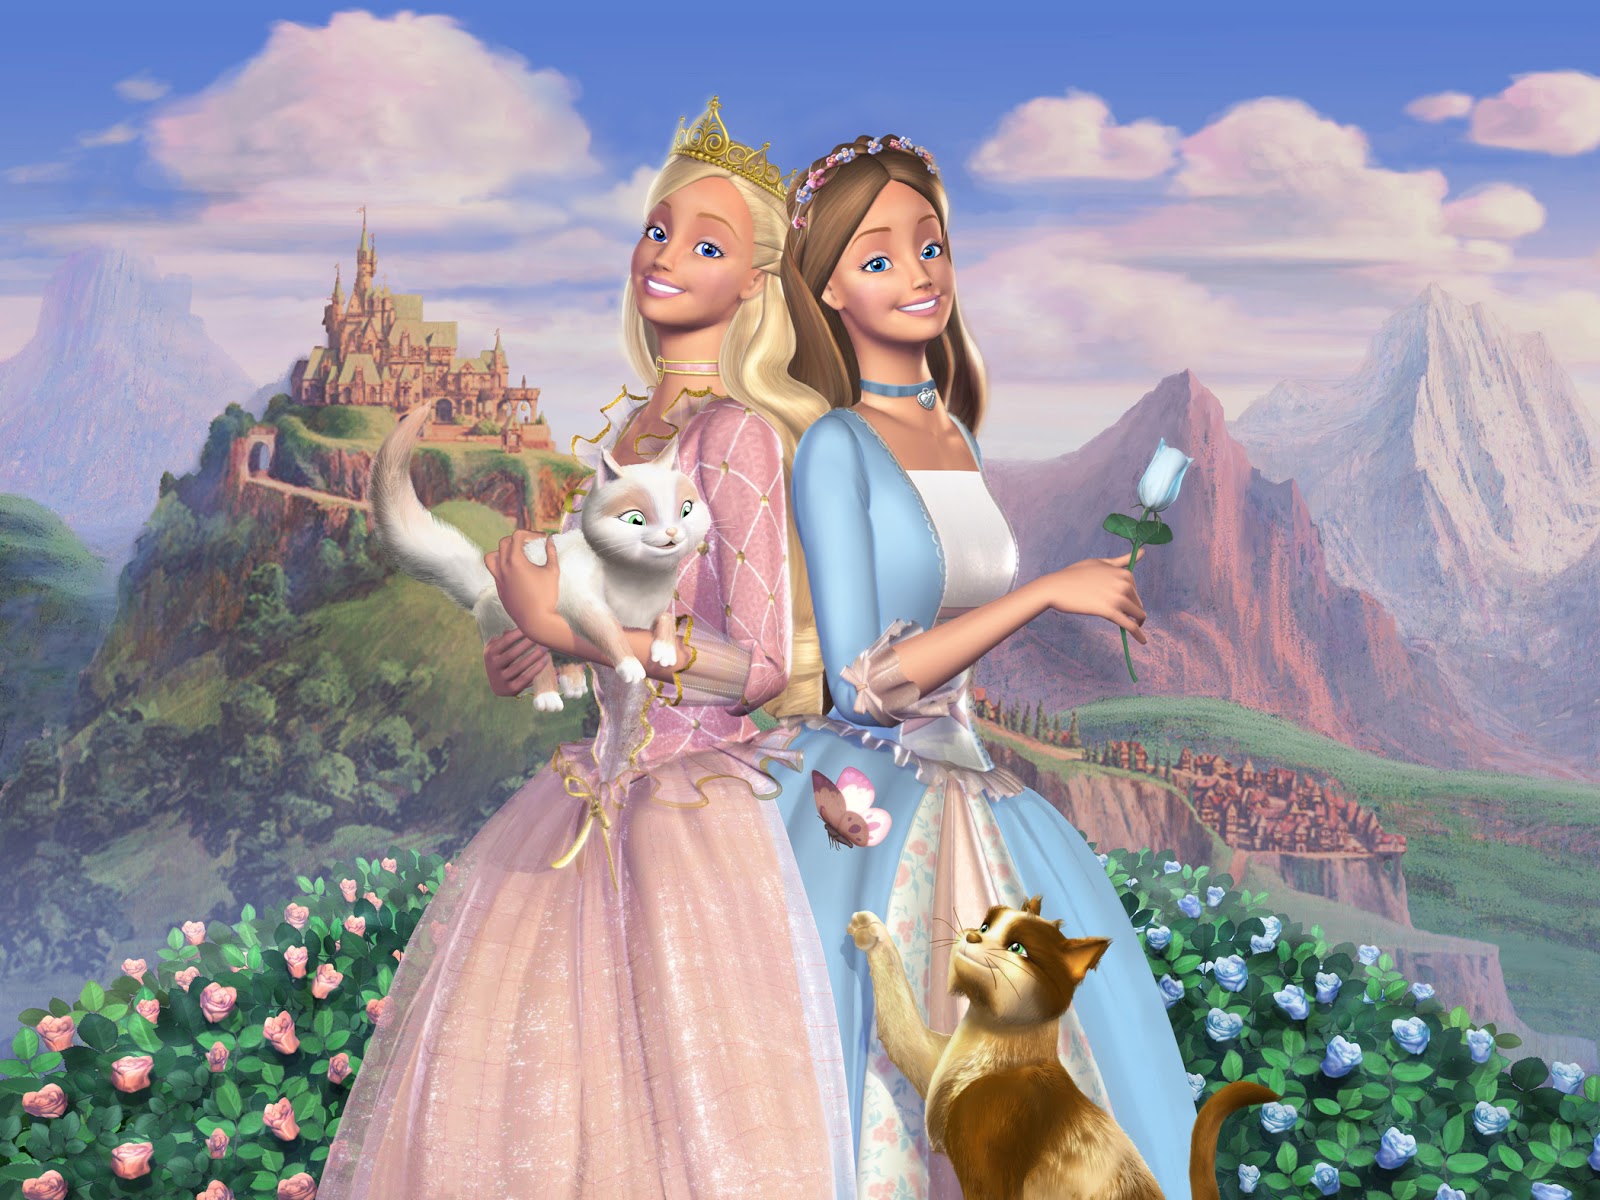 The Princess Anneliese And The Pauper Erika The Princess